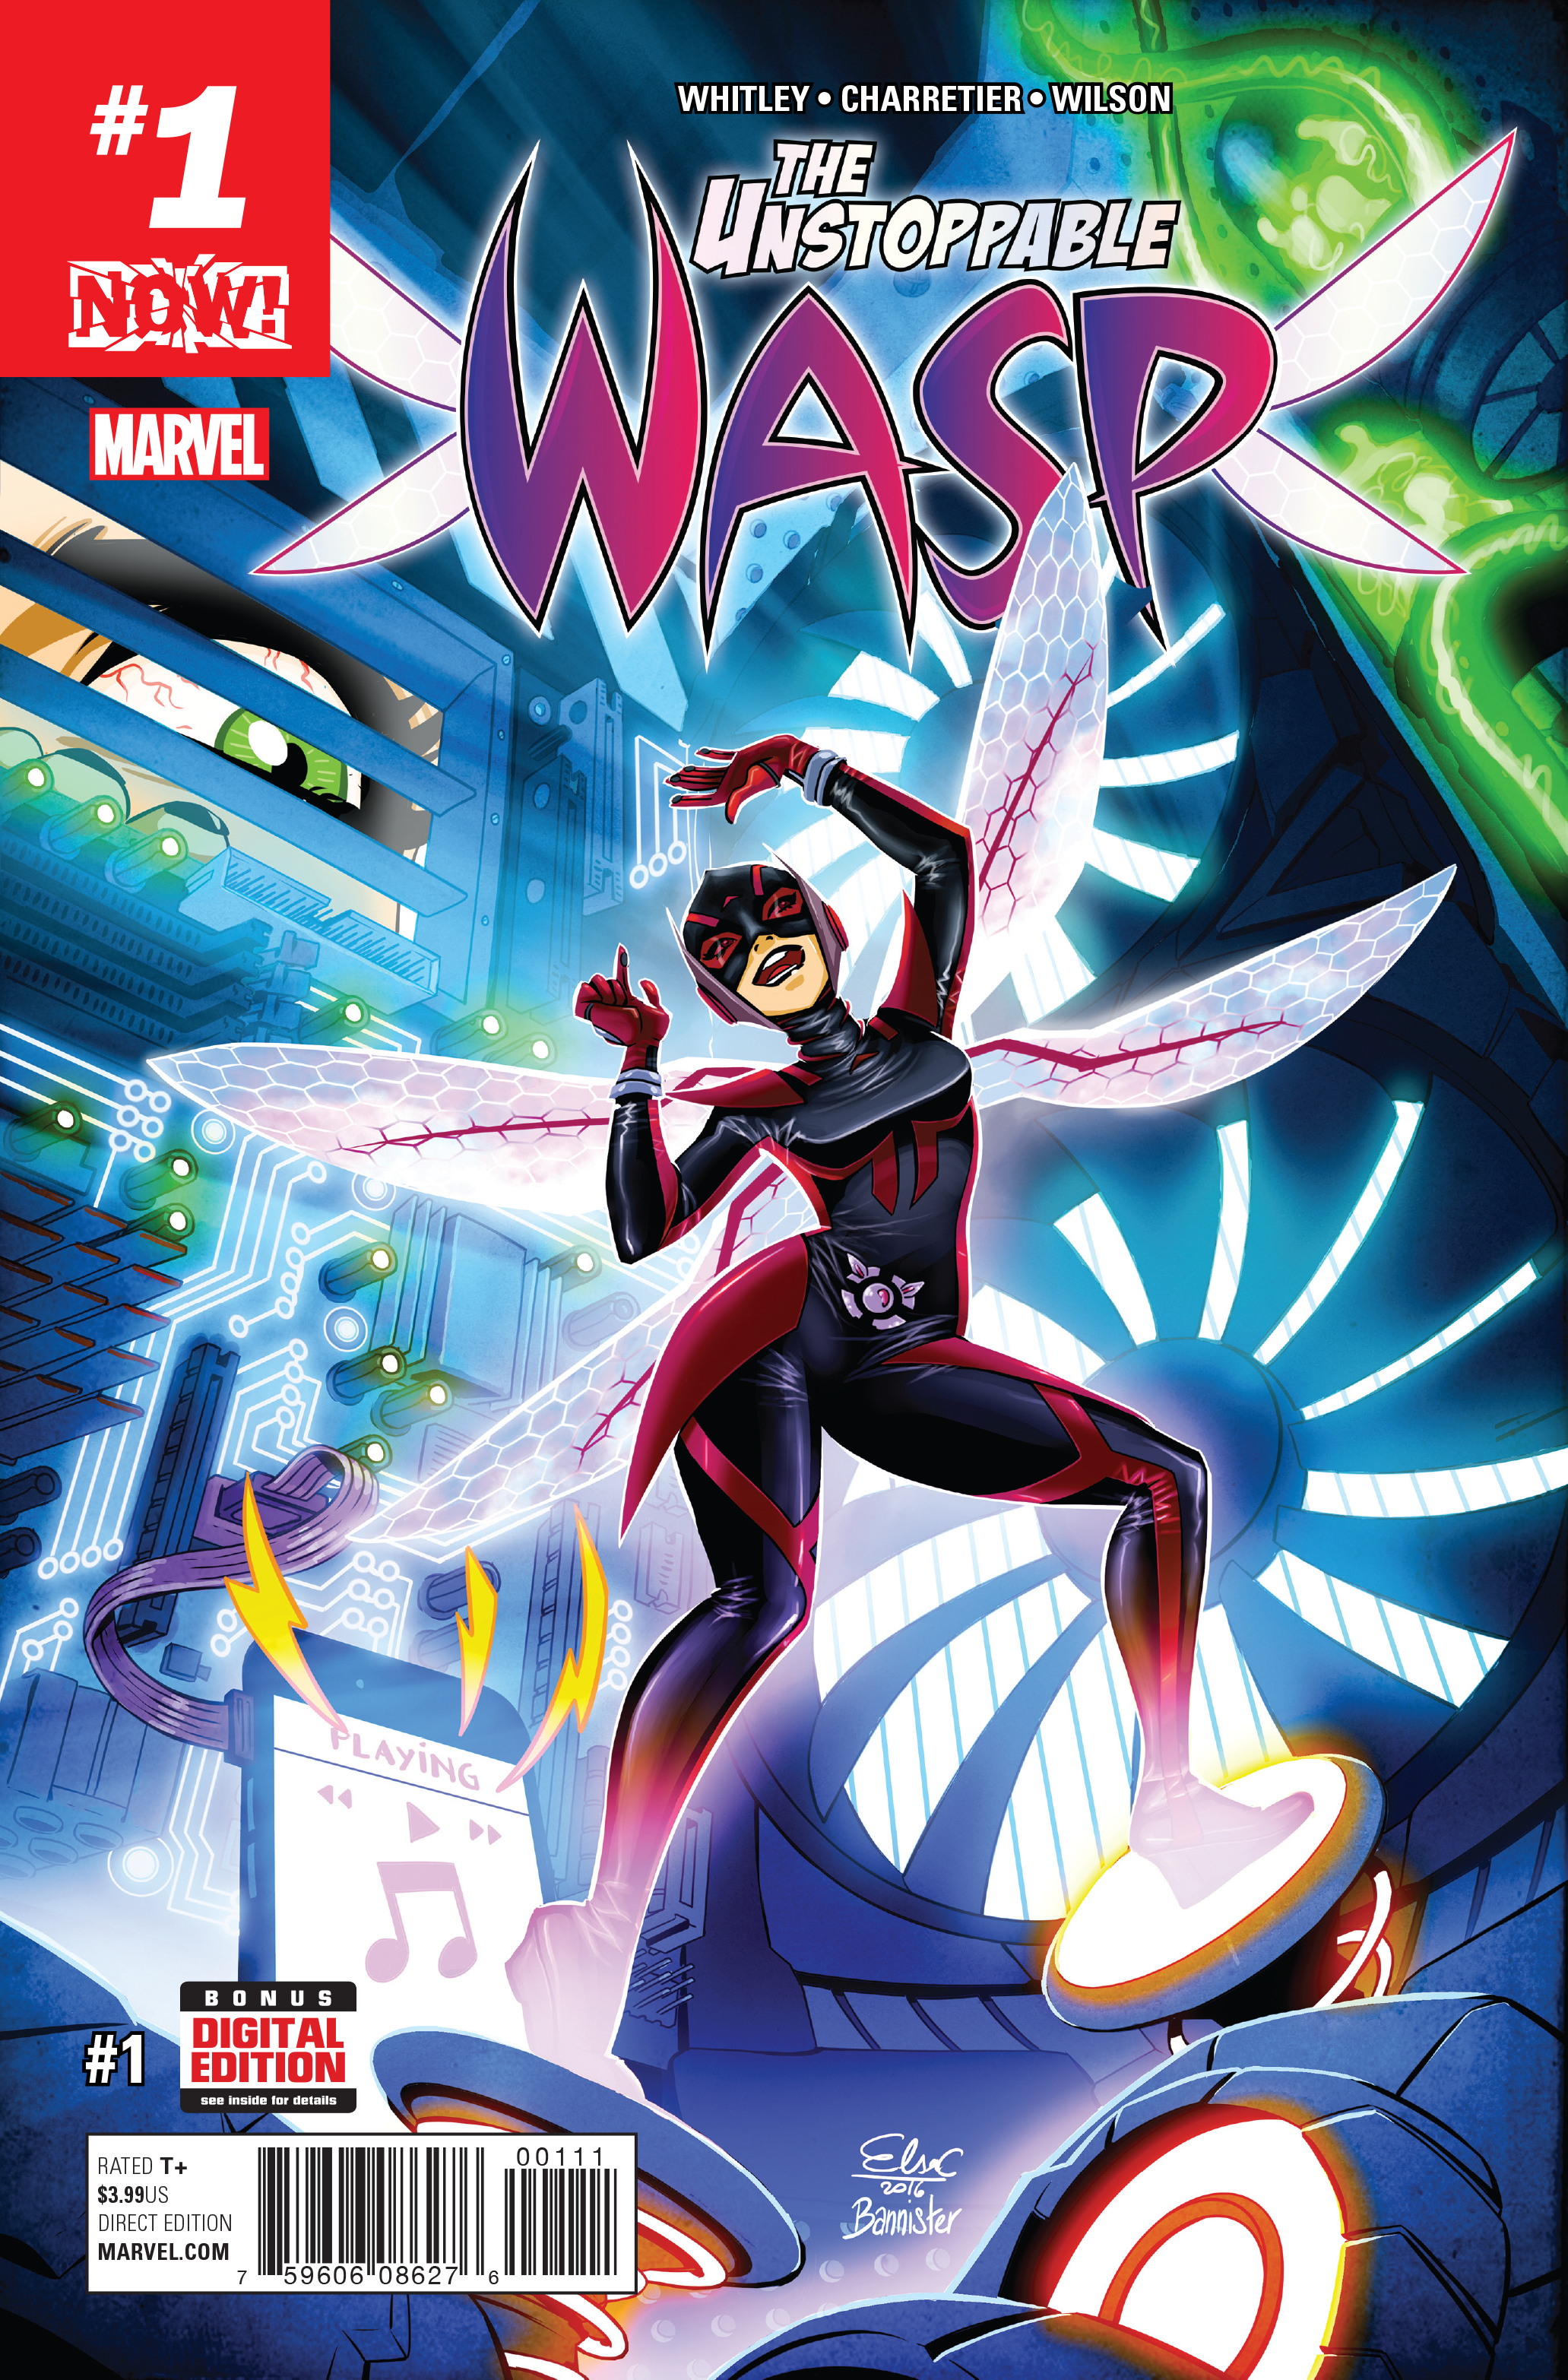 UNSTOPPABLE WASP #1 NOW